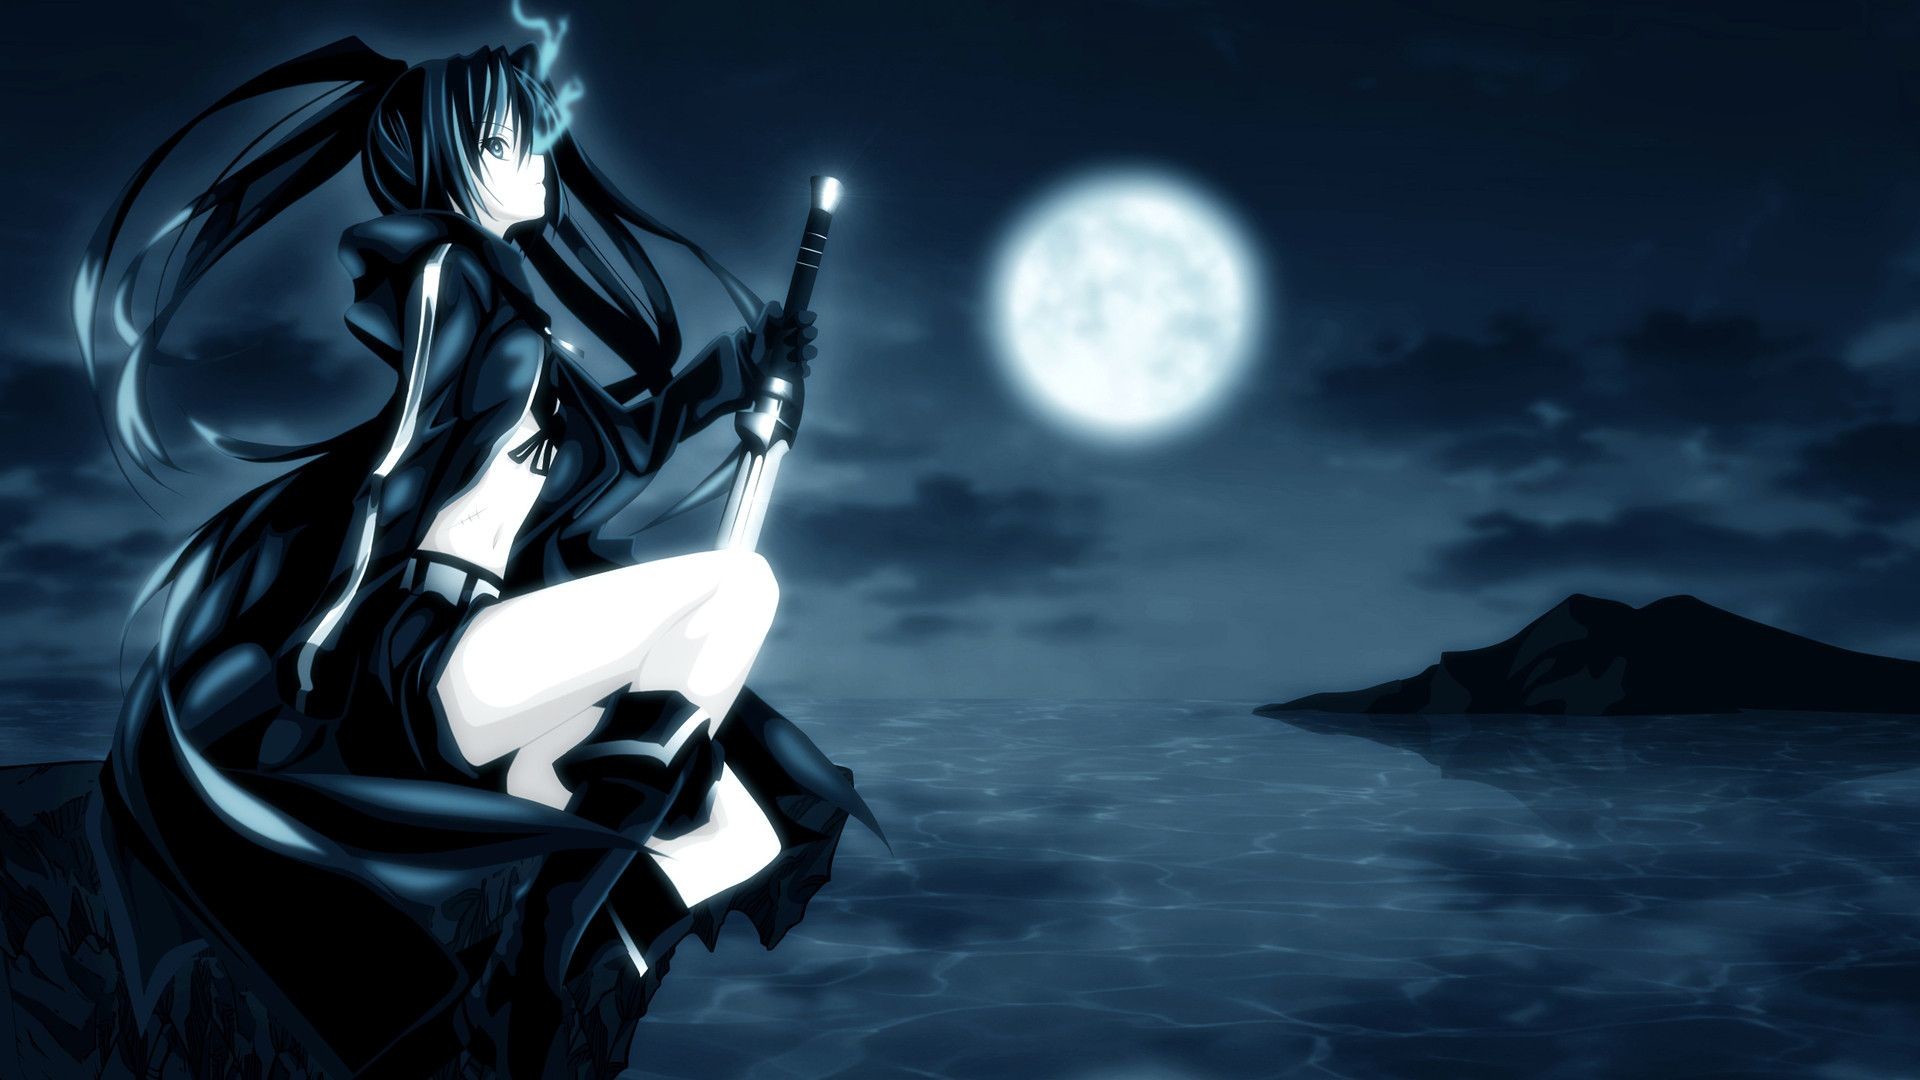 1920x1080 Anime Wallpapers HD Wallpapers Download Free Images Wallpaper [wallpaper981.blogspot.com]